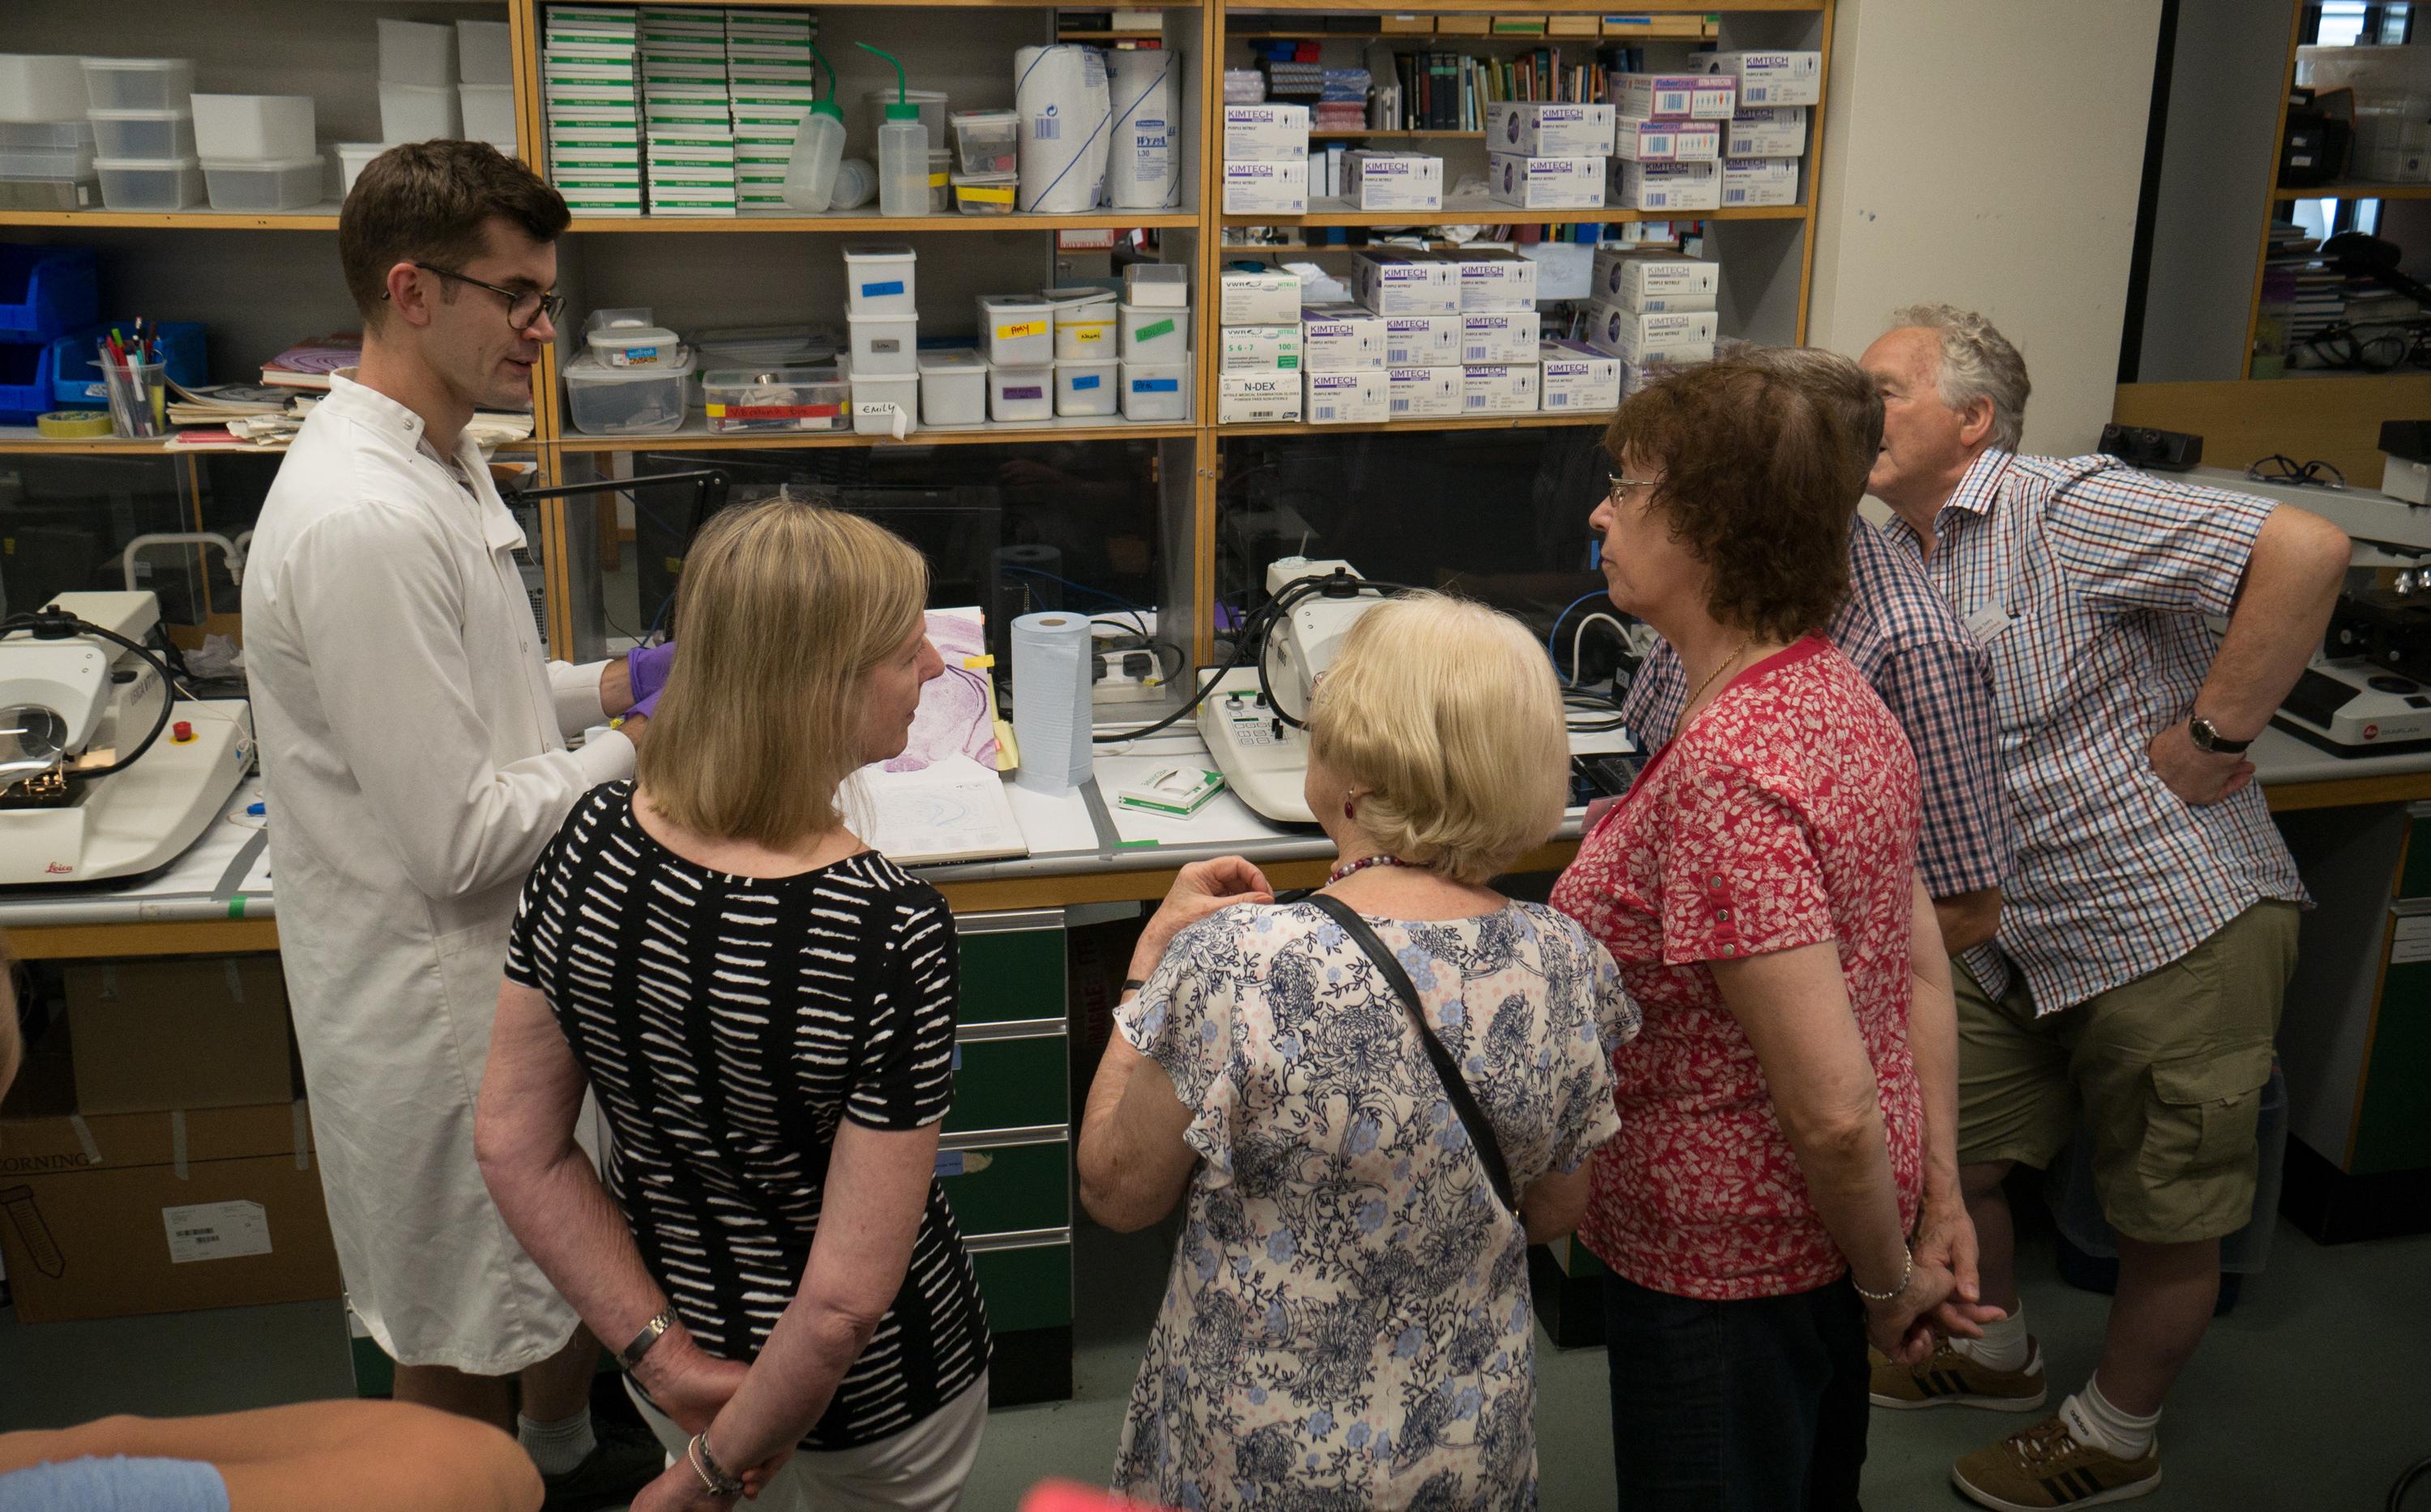 Unit student Luke Bryden (left) engages visitors with his practical demonstration of some of the lab equipment and techniques used at the Unit for its research on Parkinson’s disease.